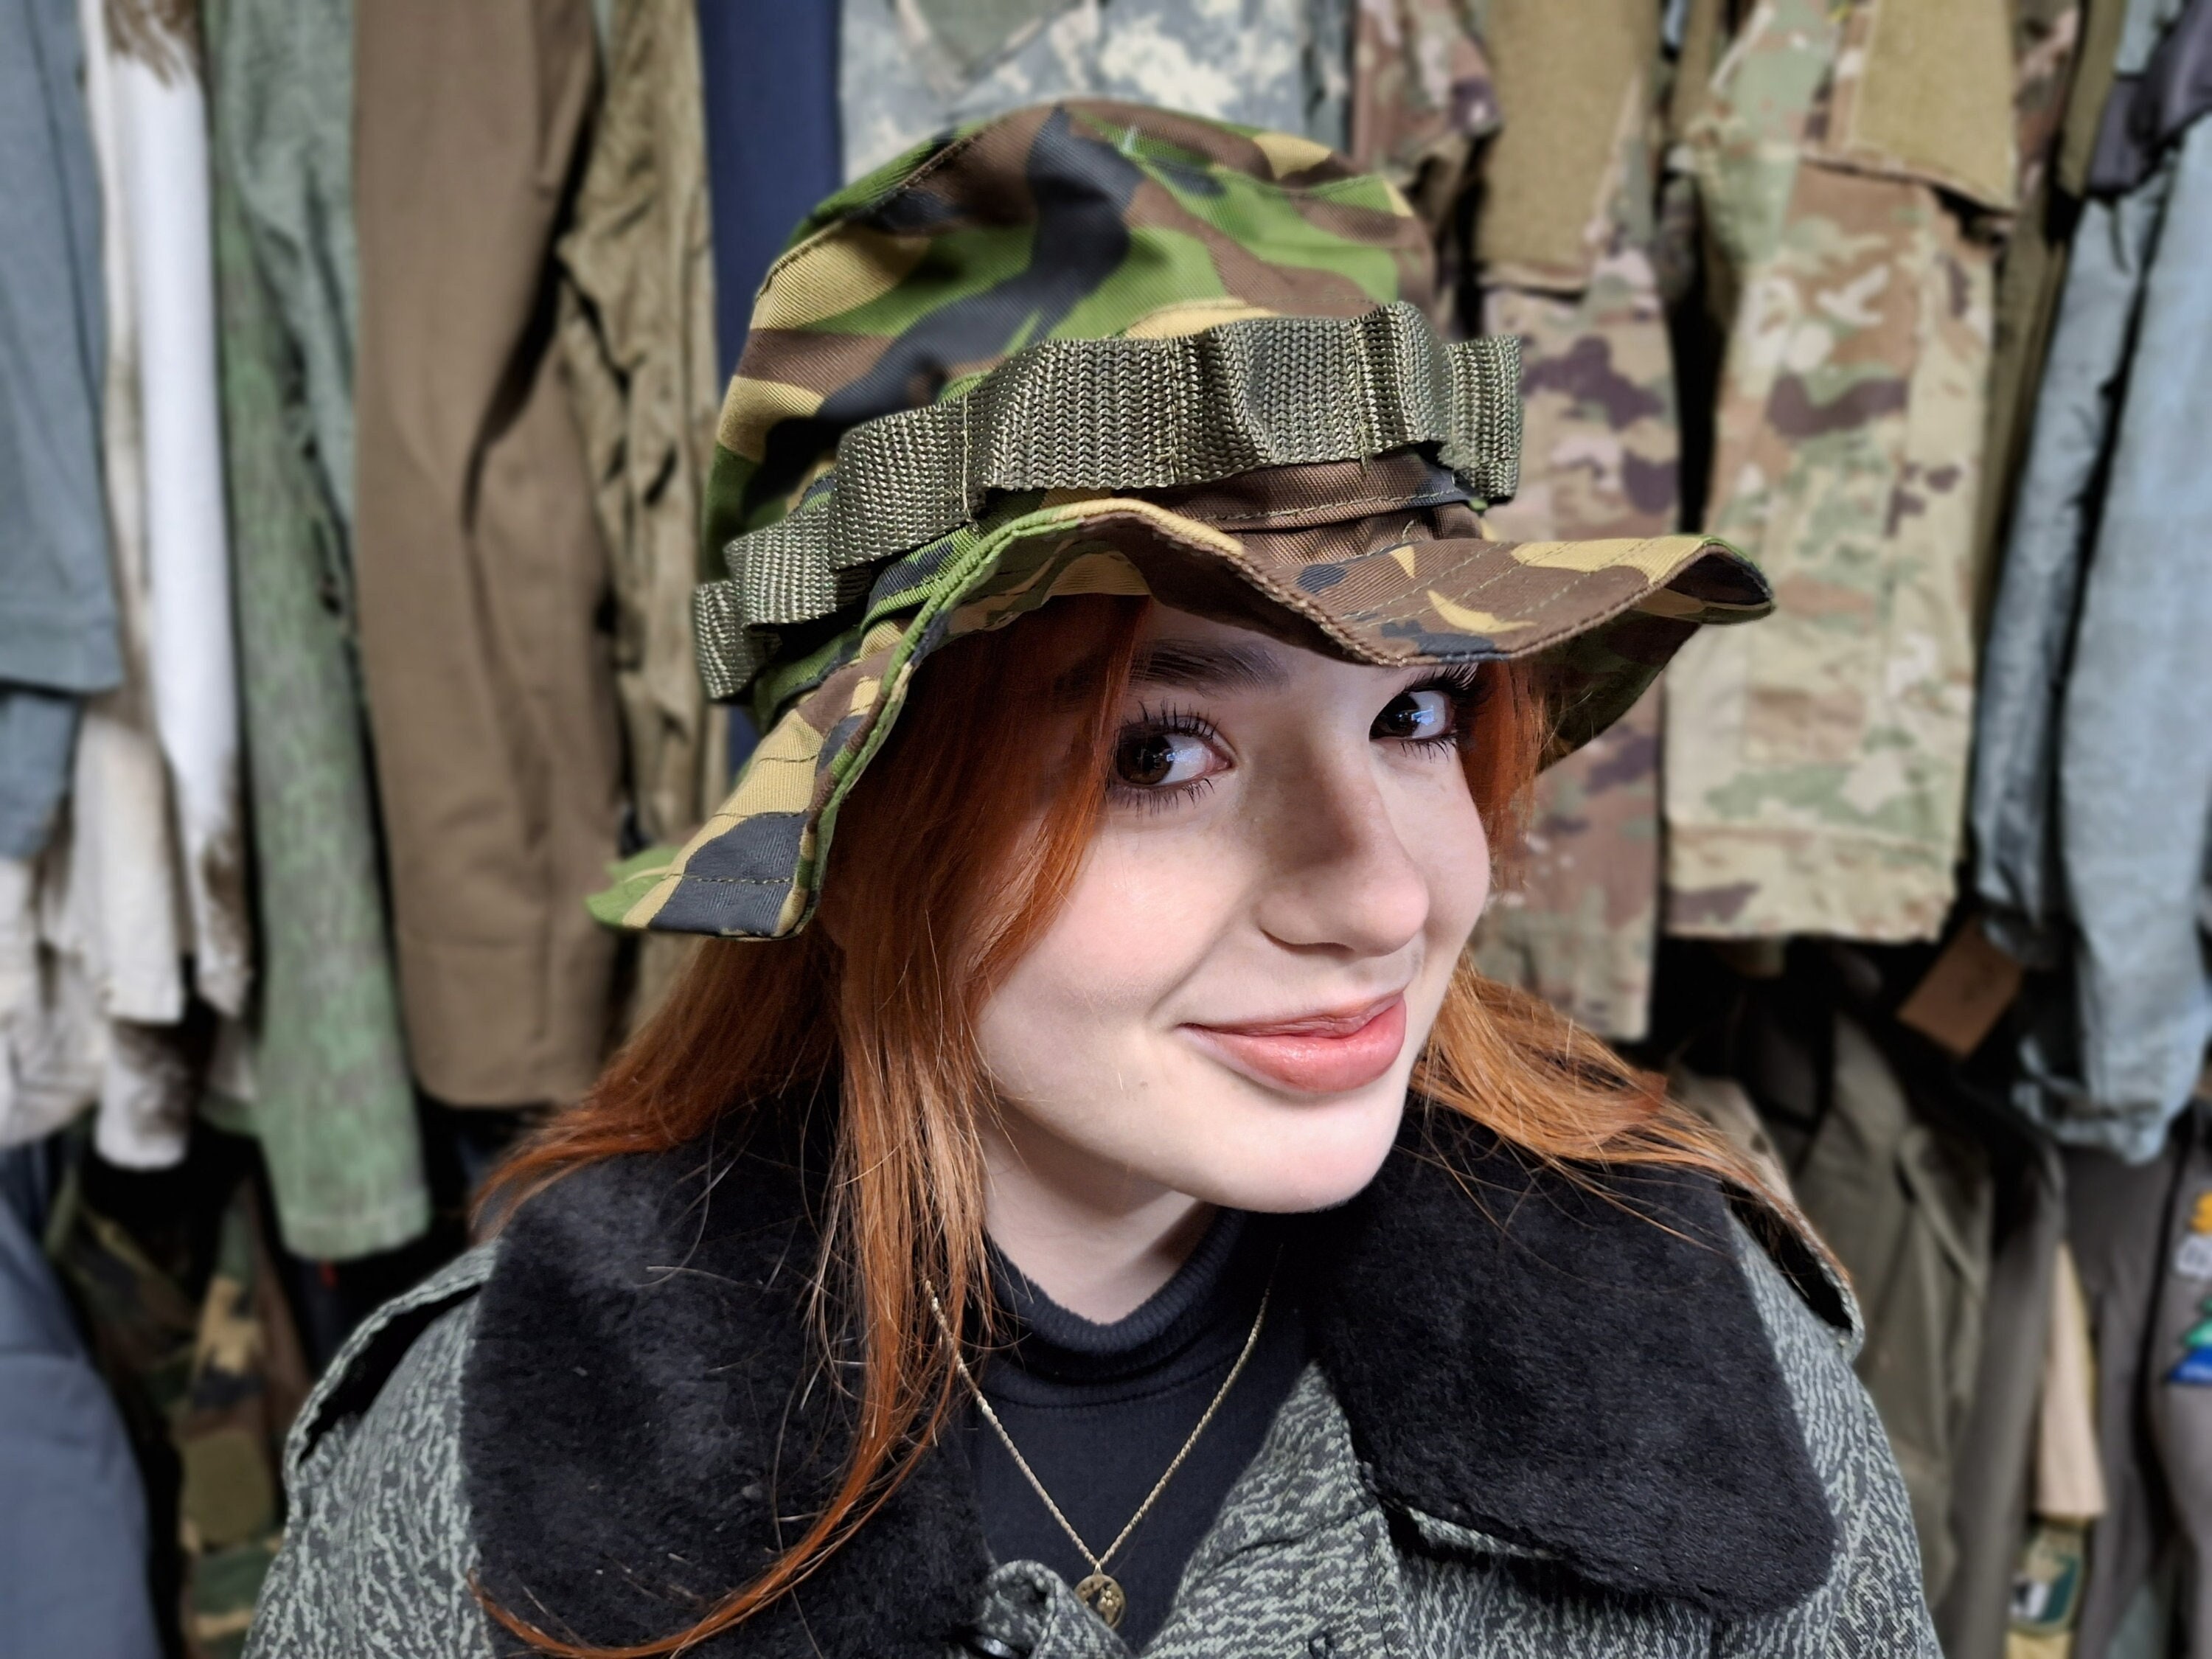 Military Boonie Hat -  Canada